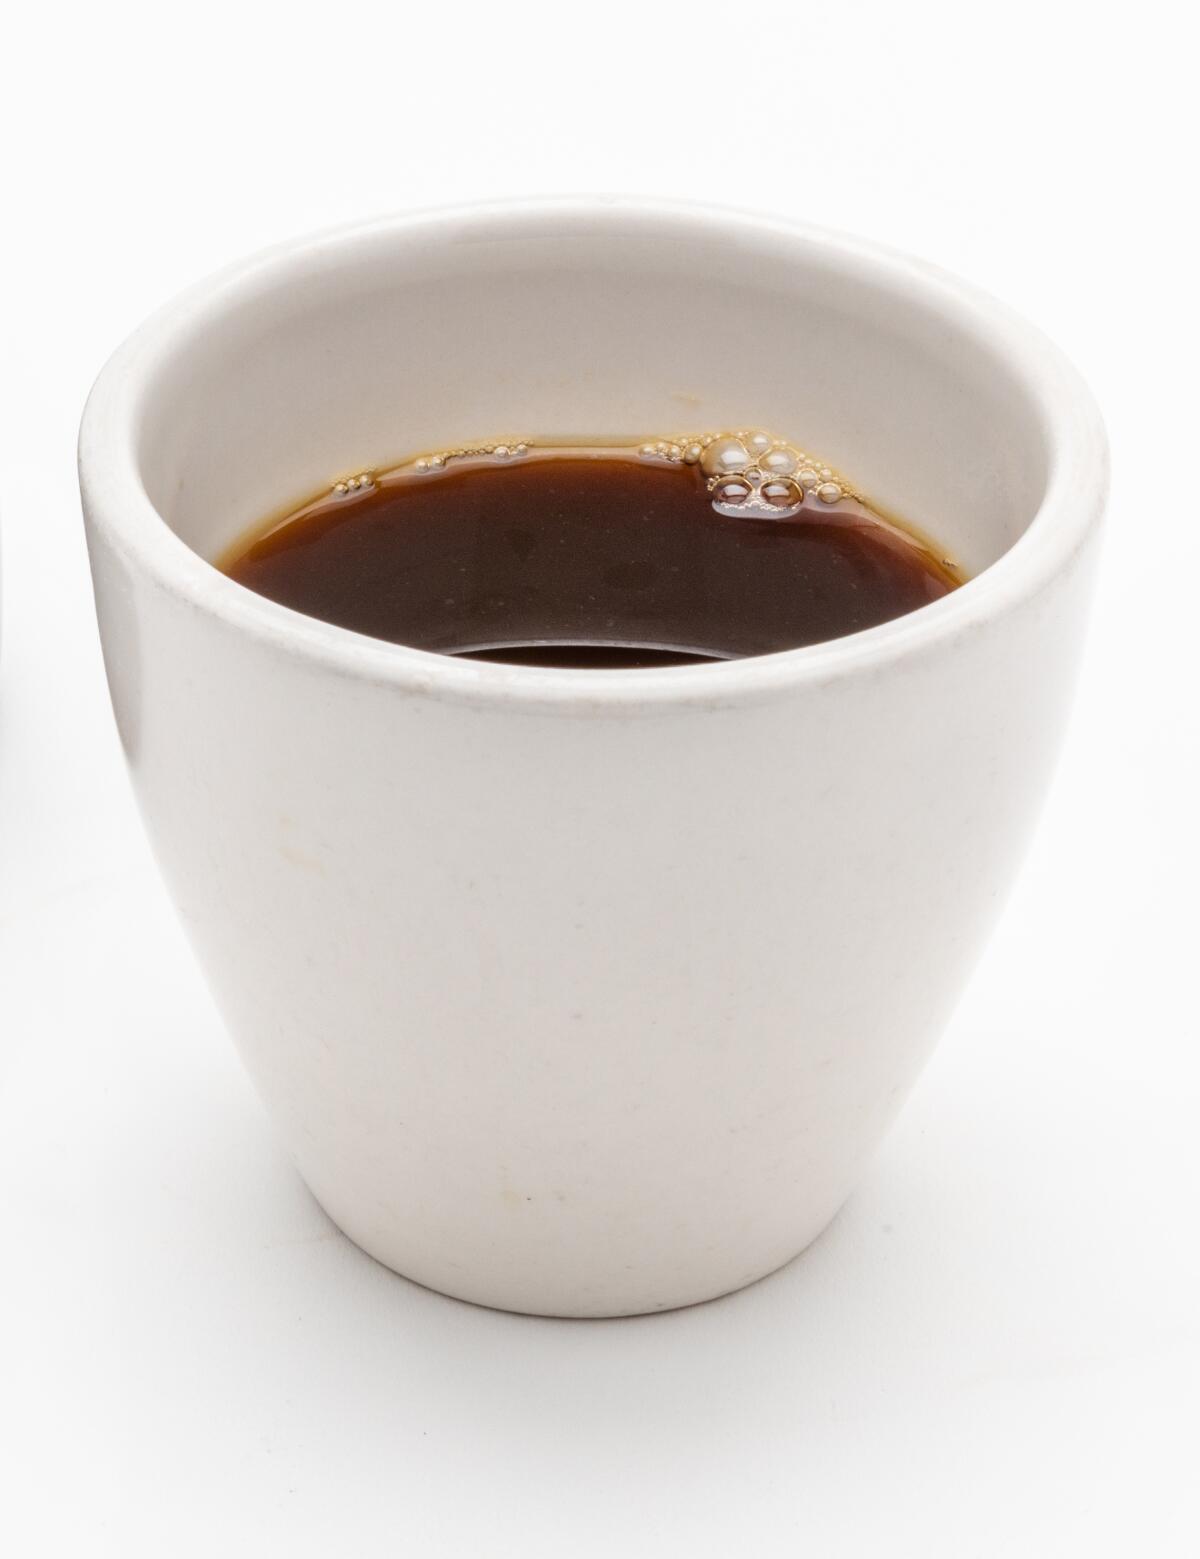 A white mug filled with black coffee.